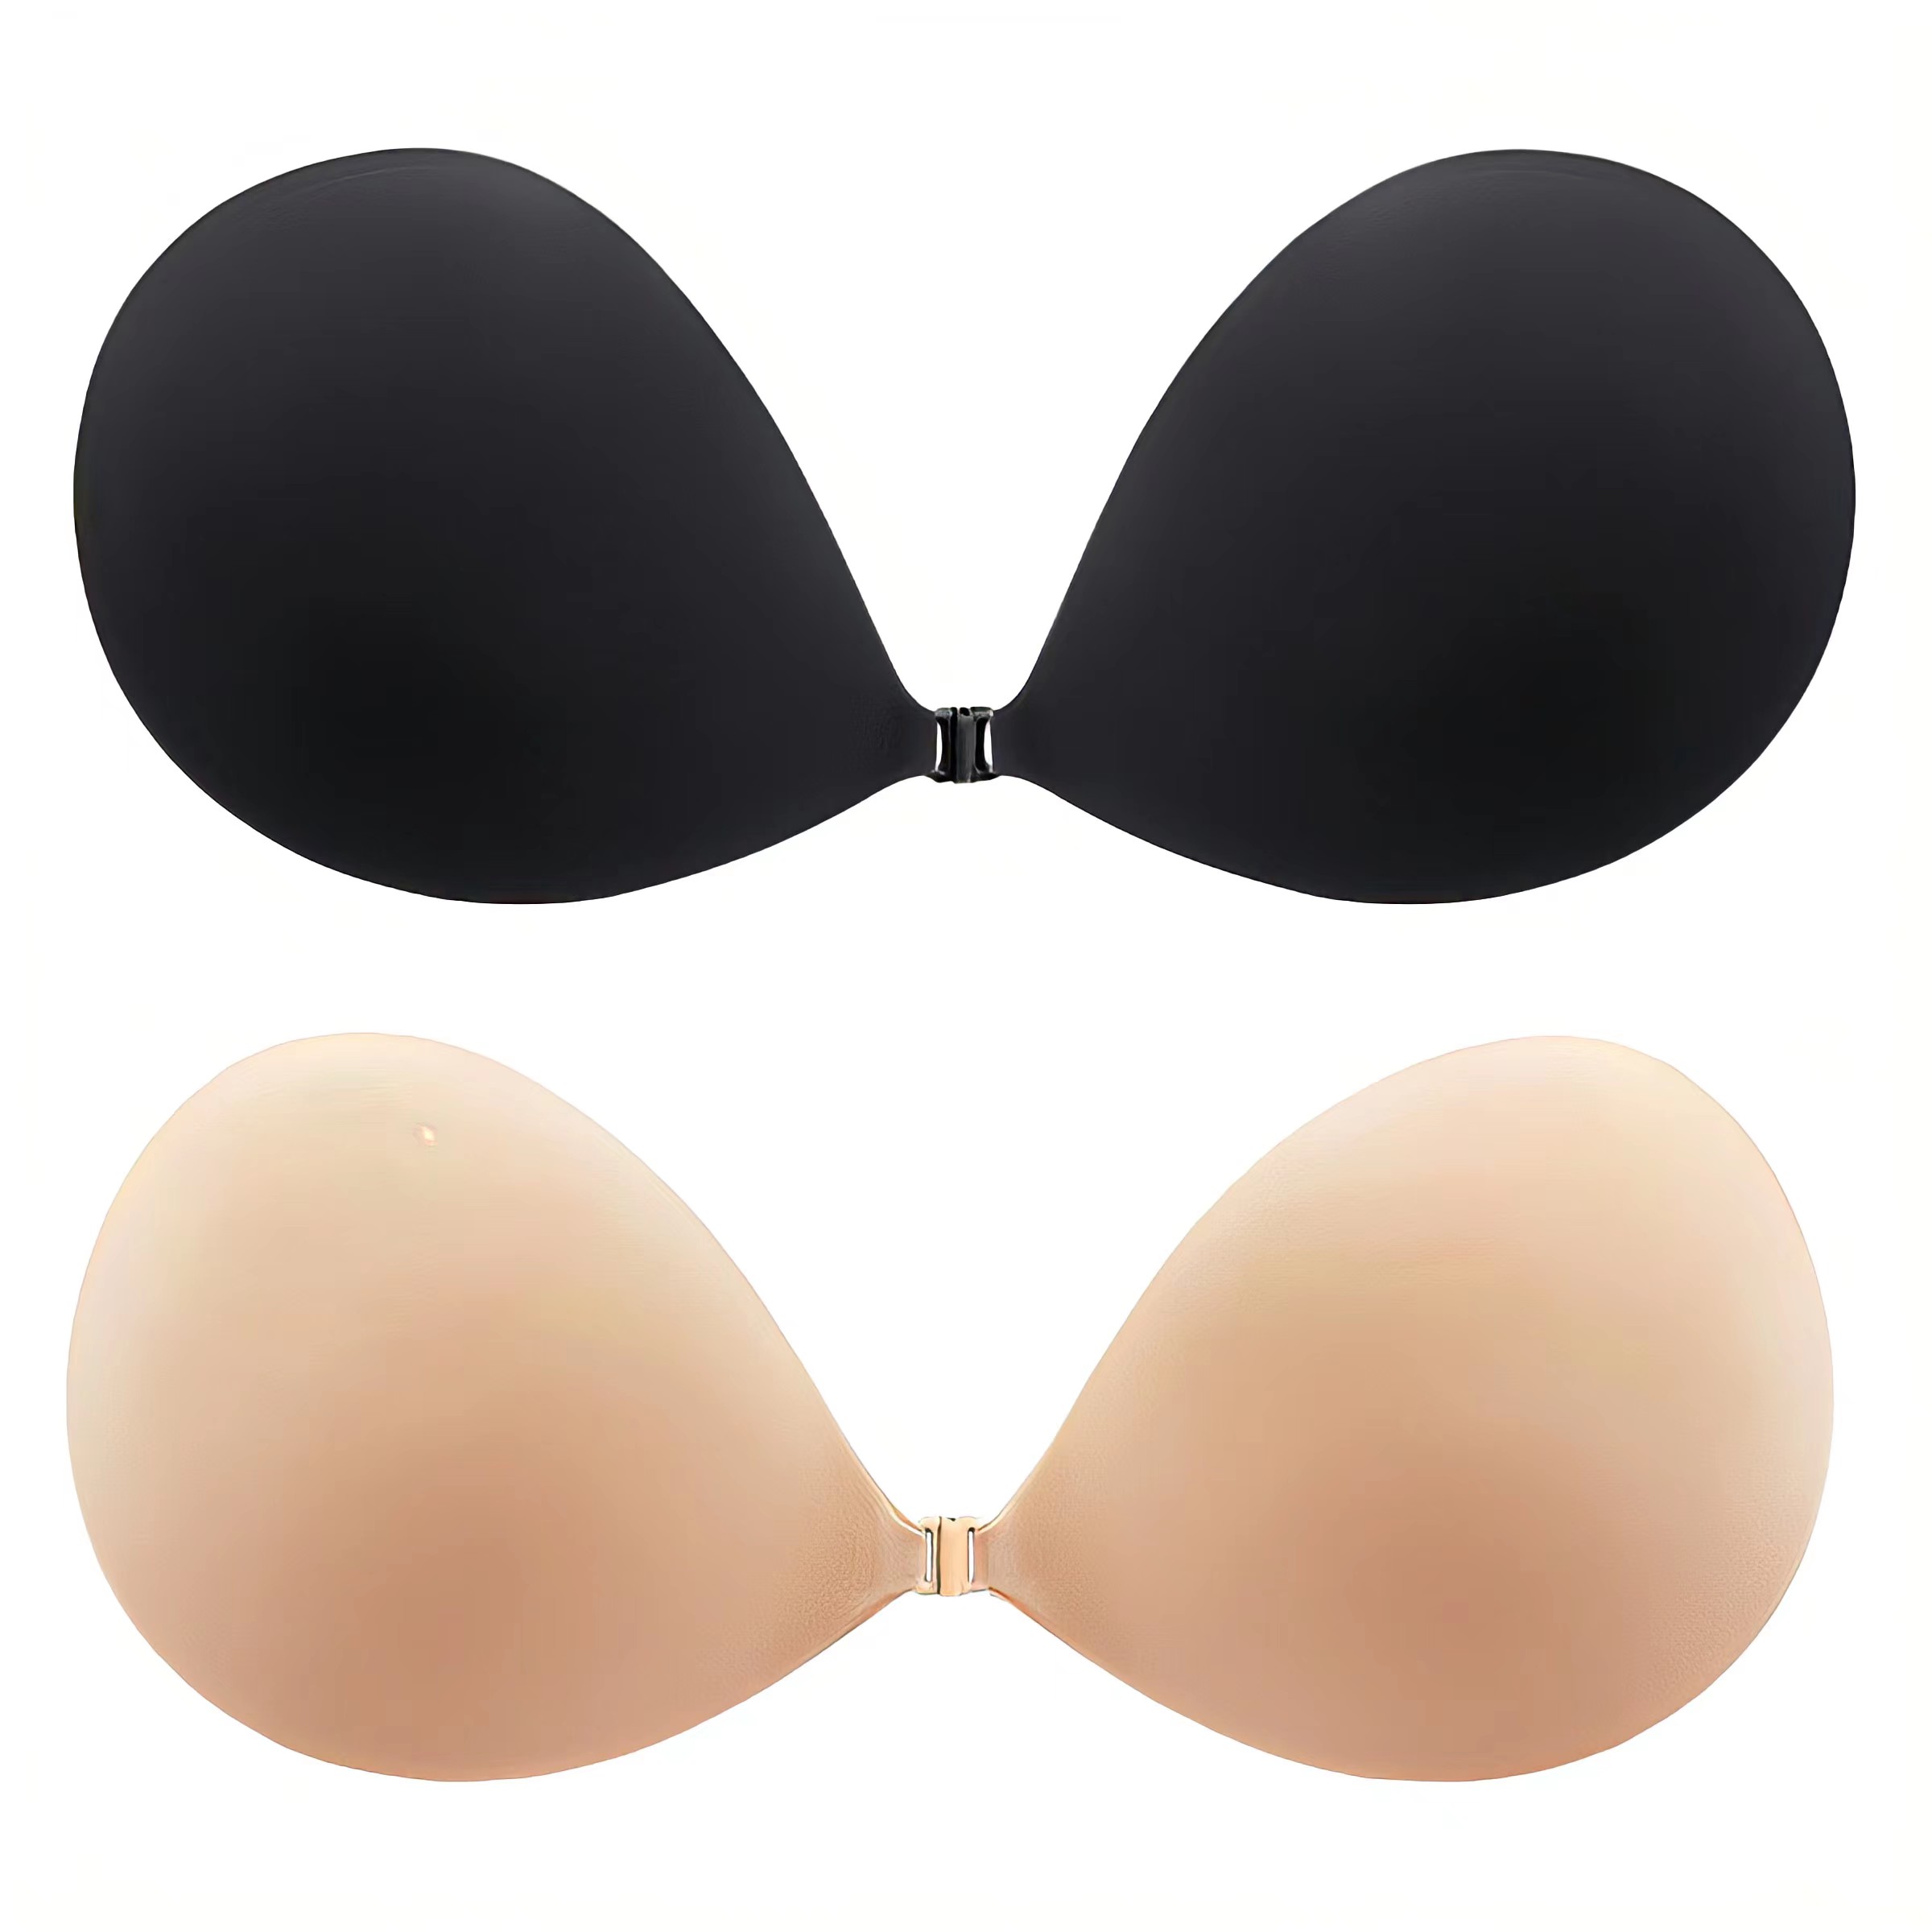 Strapless Silicone Invisible Women Push Up Bra Without Straps